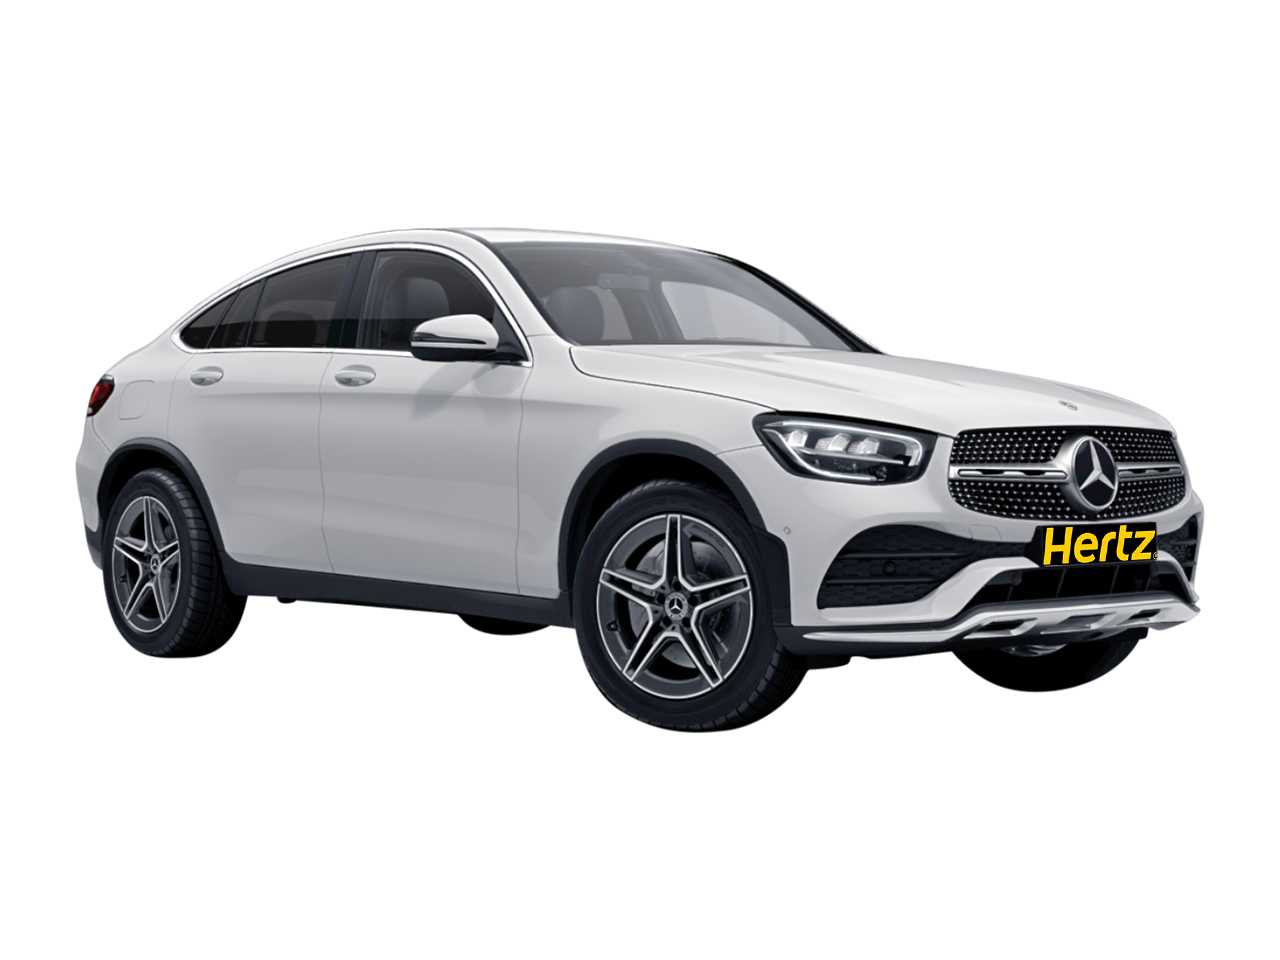 Mercedes Benz GLC 300 Coupe side front